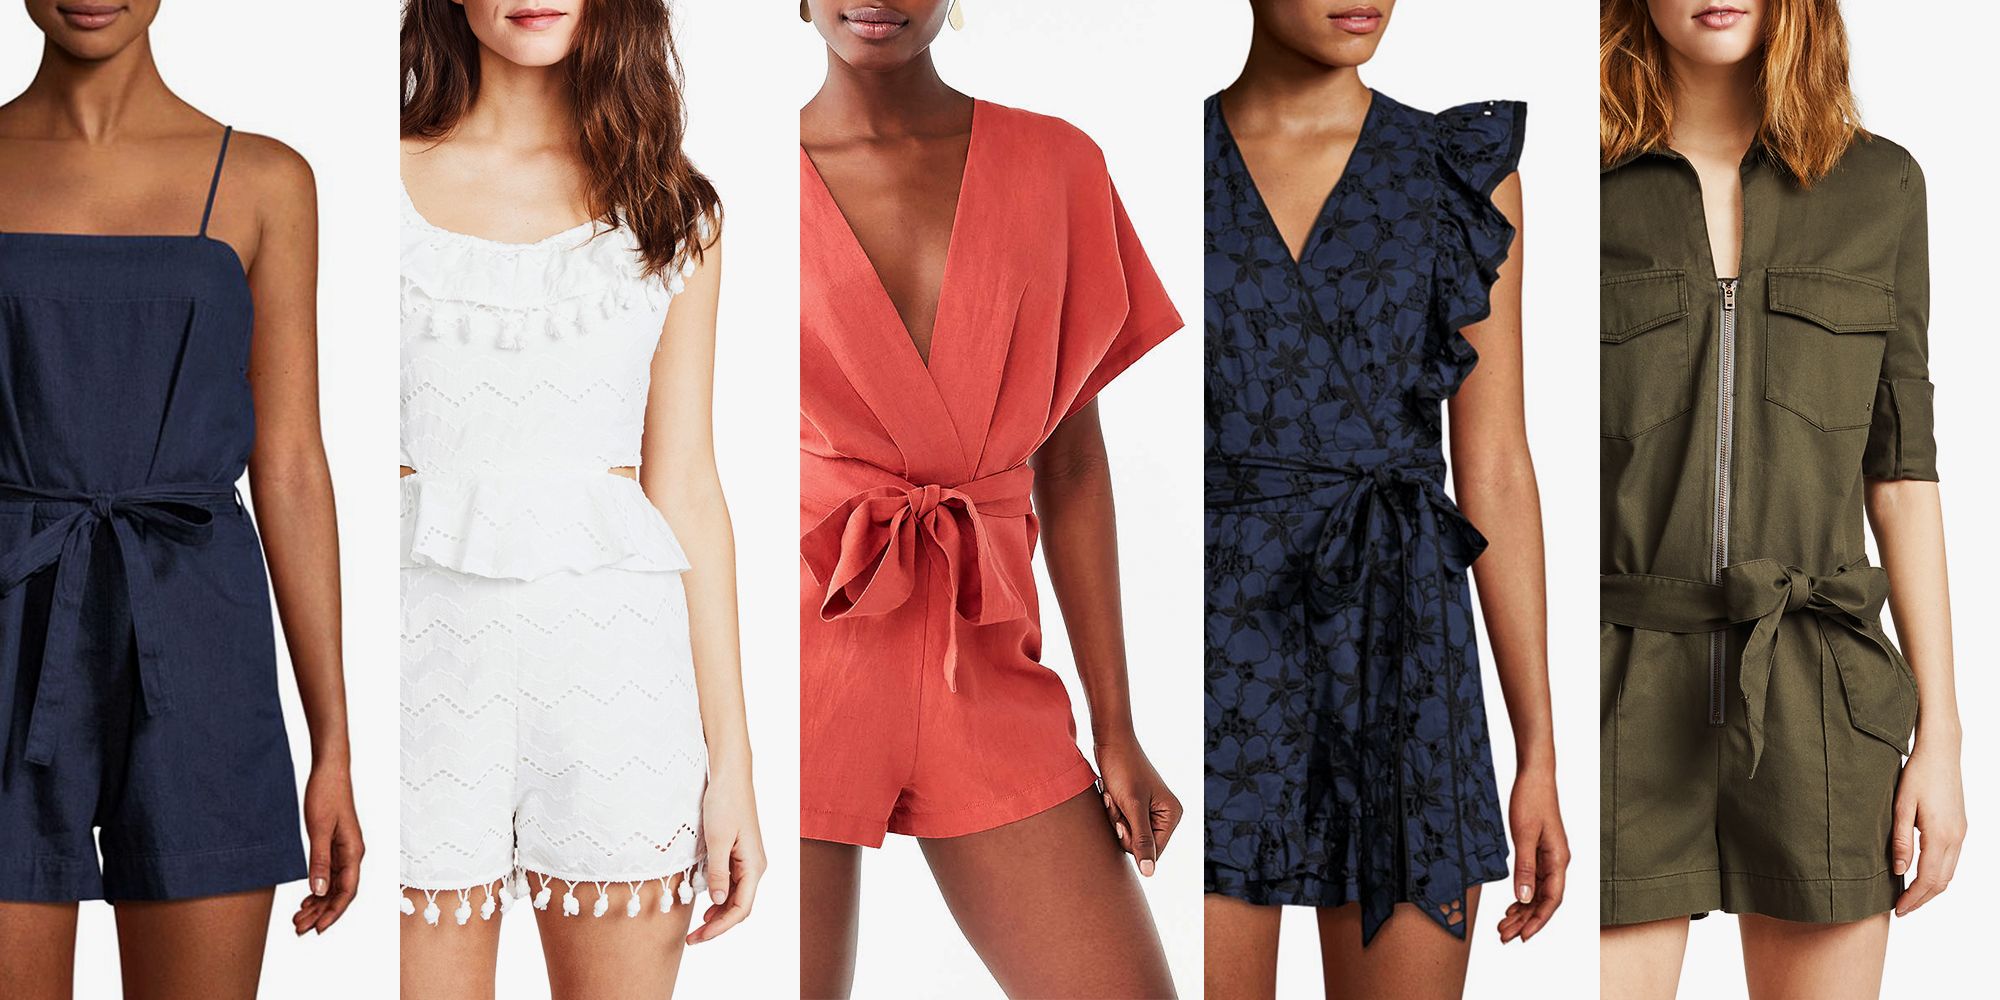 Trendy Jumpsuits for Women 2018 - How to Wear a Romper or Jumpsuit